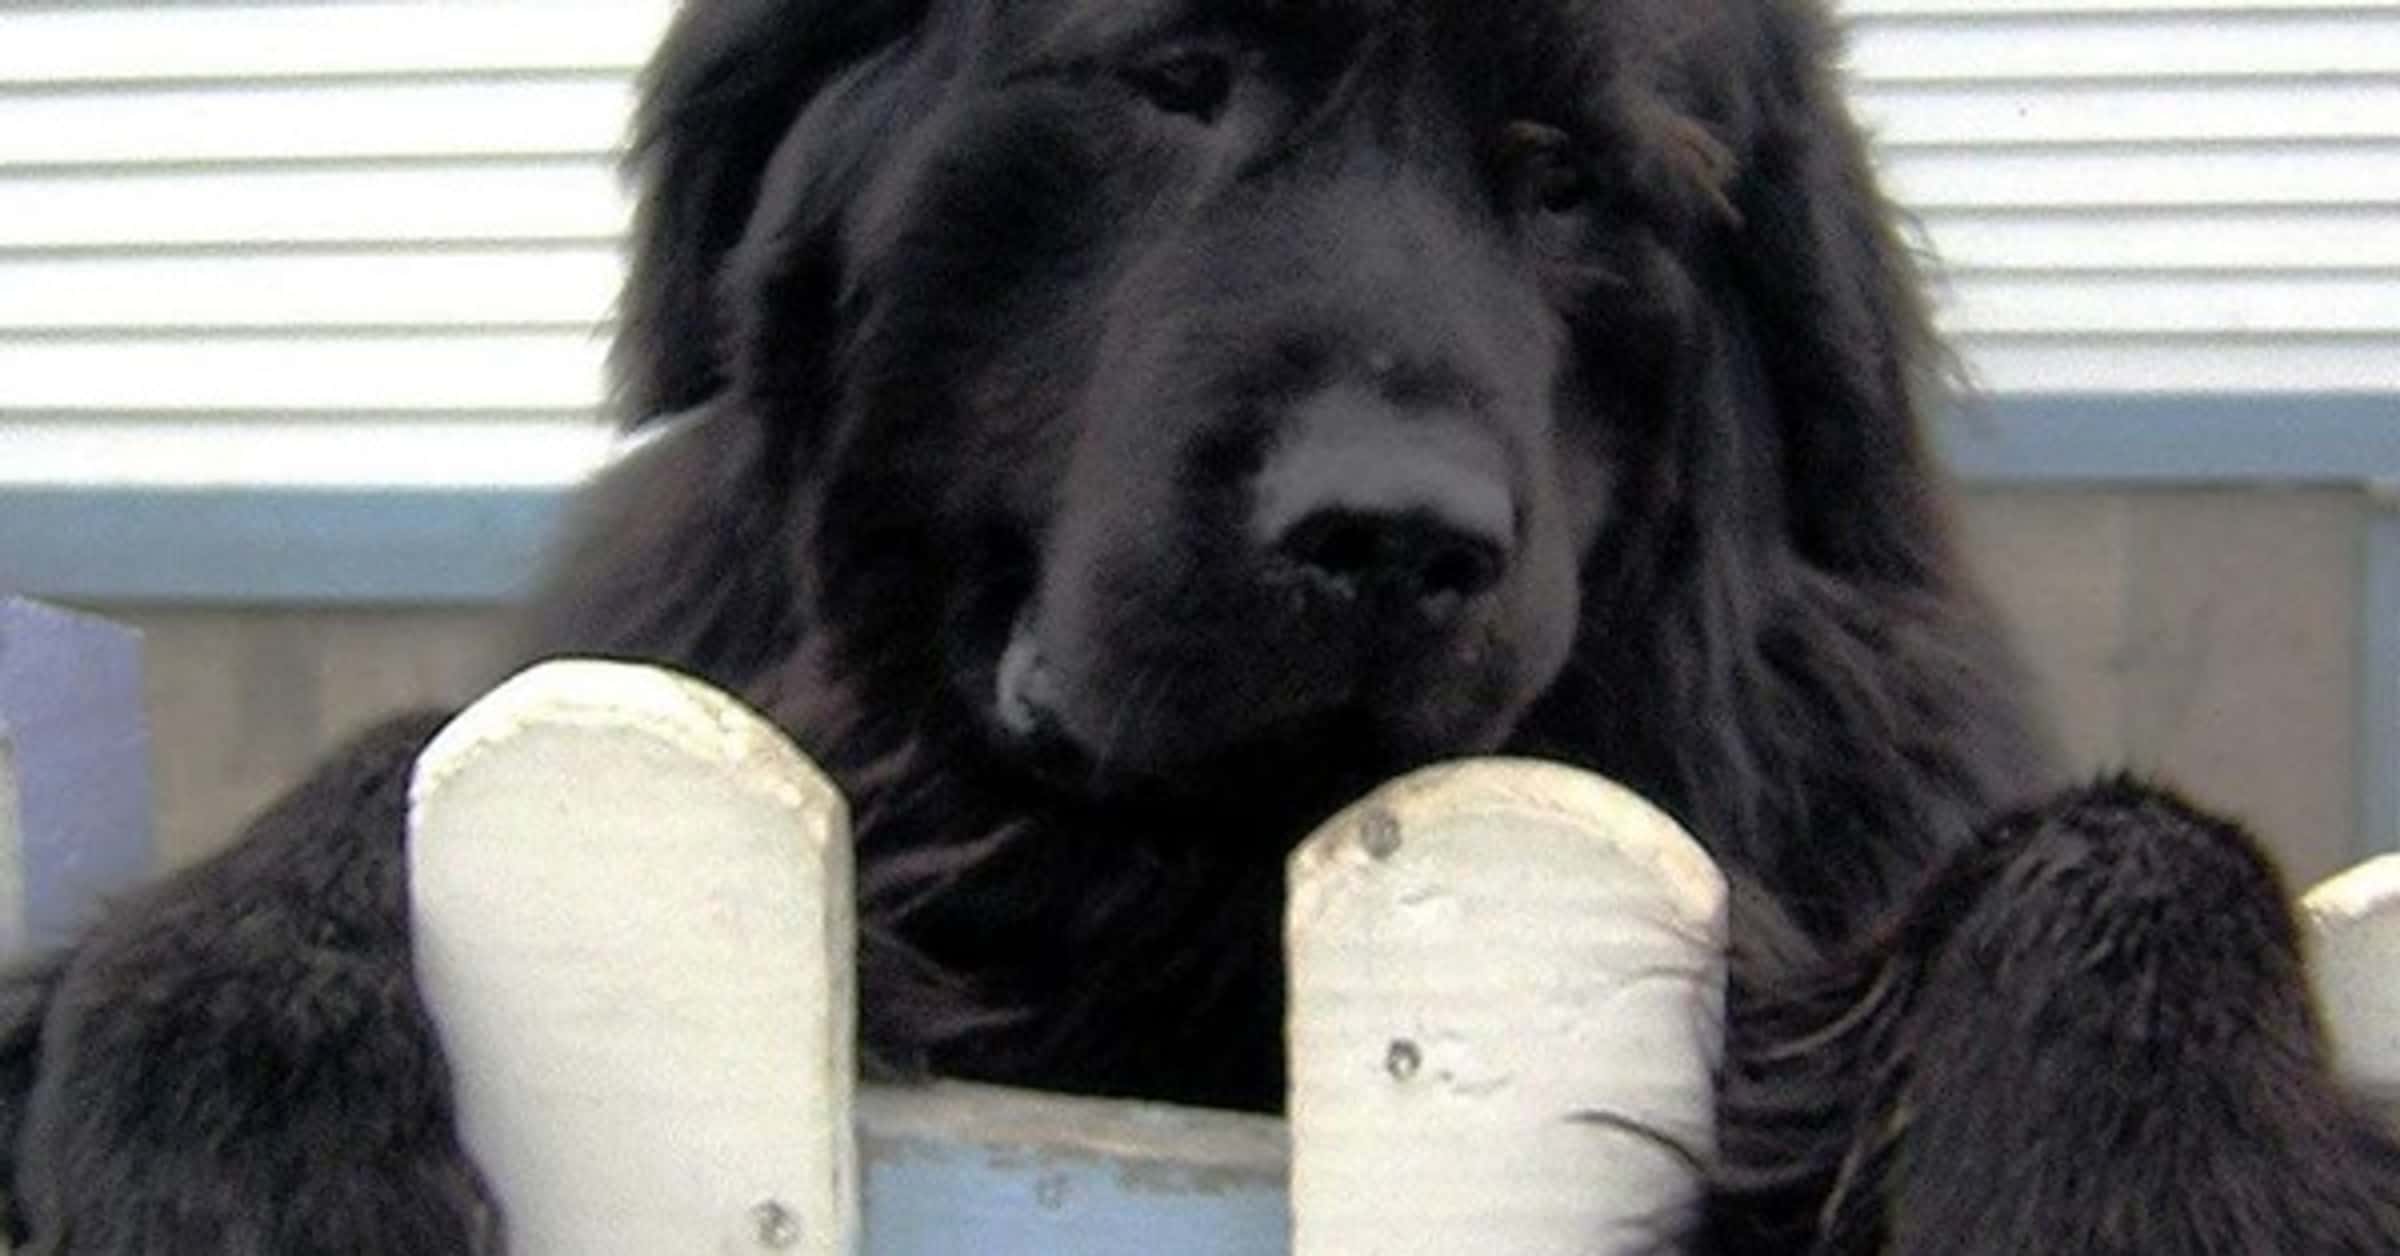 are newfoundland dogs barkers